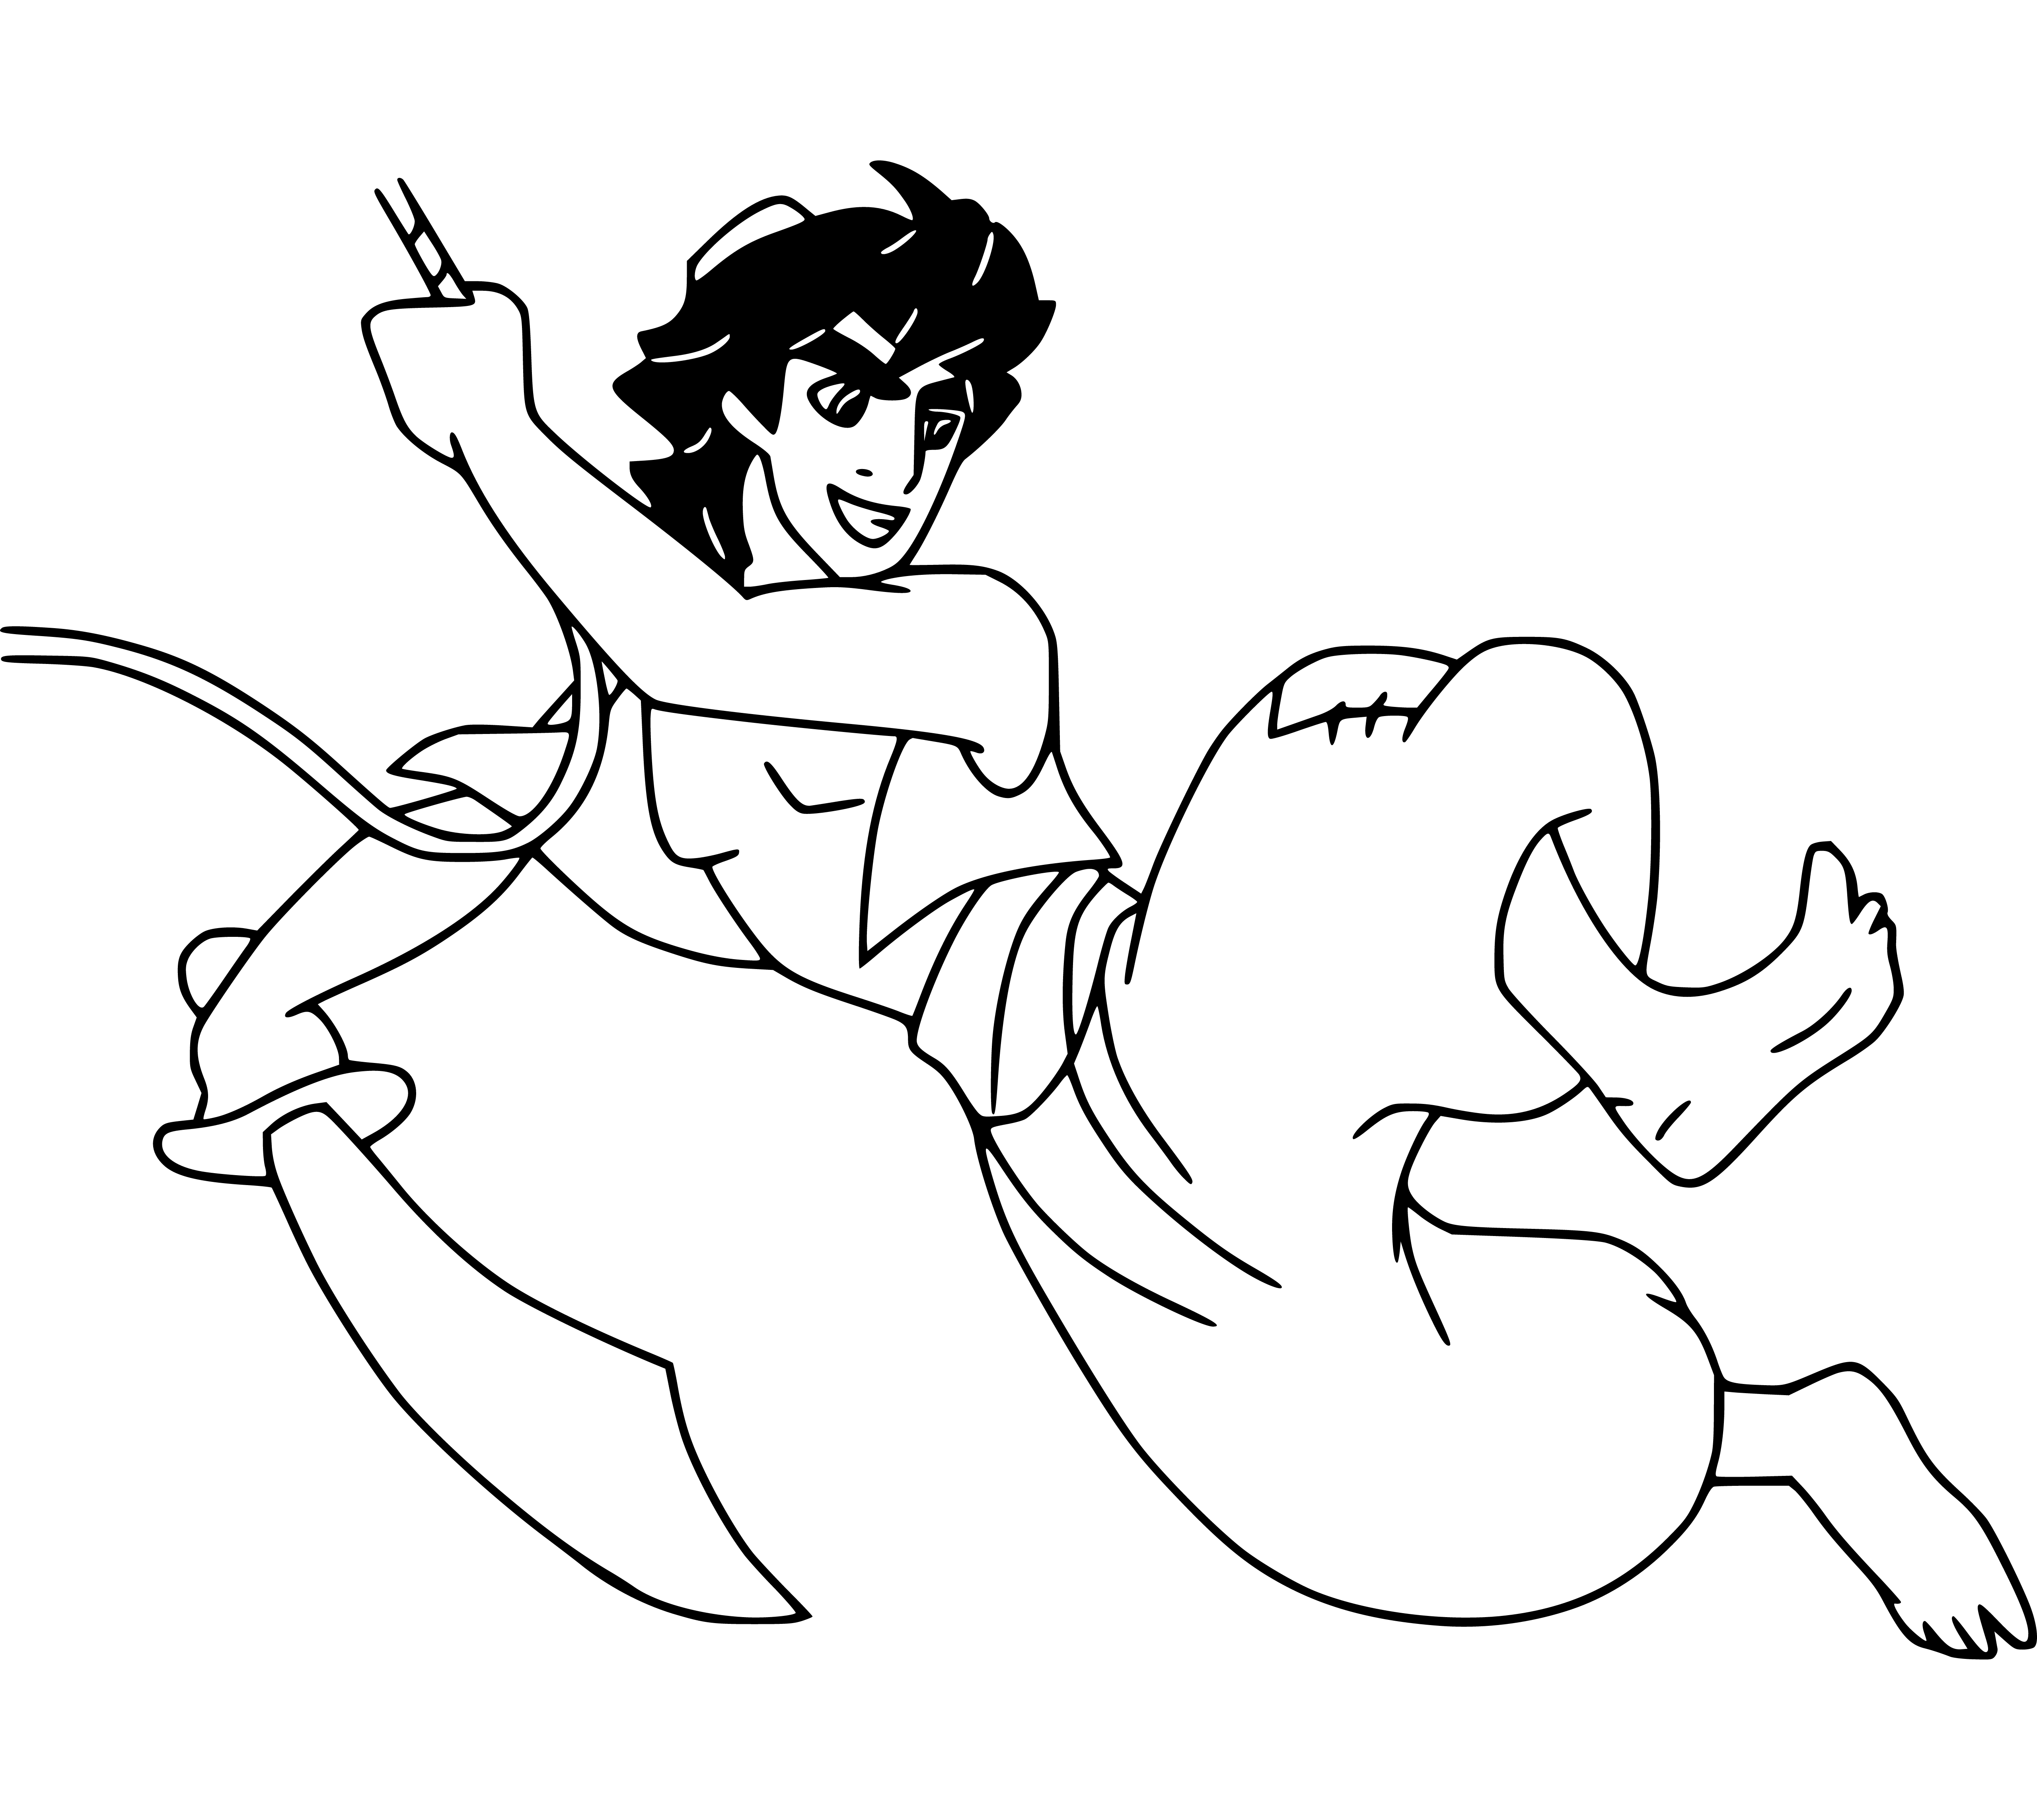 Disney Aladdin empty outline Coloring Page Printable for Kids, Free, Simple and Easy, as PDF